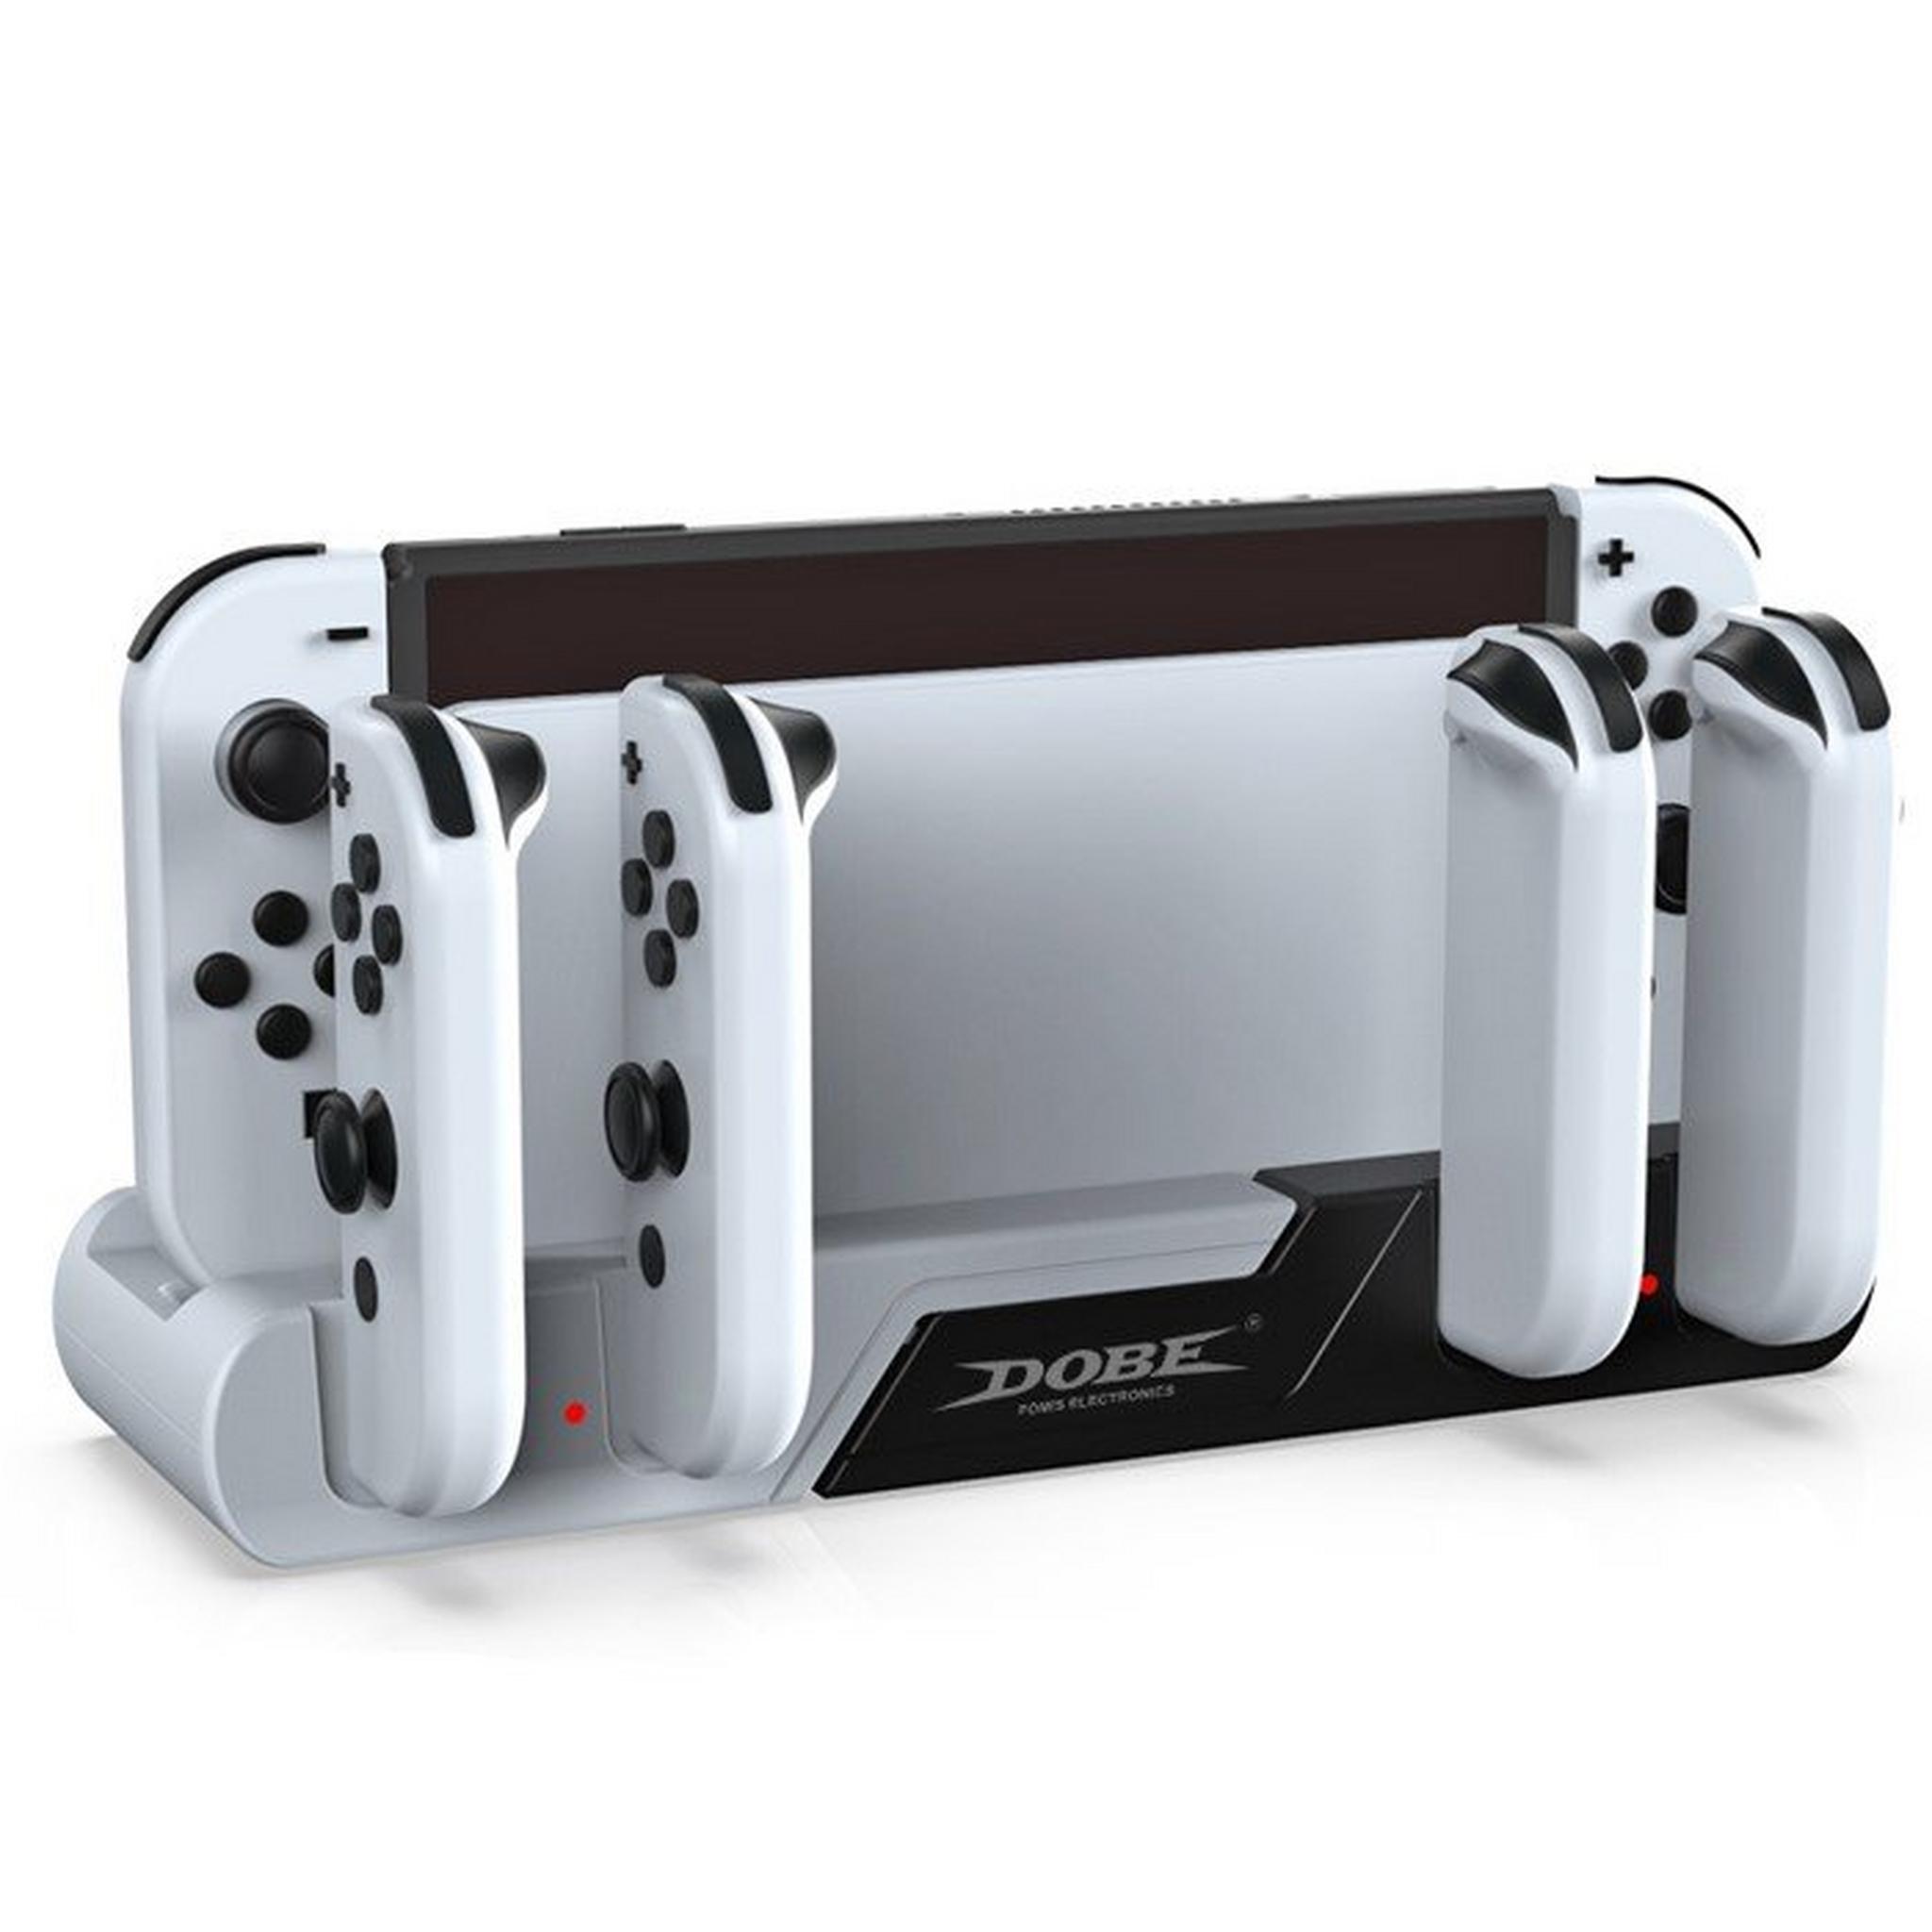 Dobe Charging Station for N-Switch OLED Joy-Con , L/R Small, TNS-0122B - White